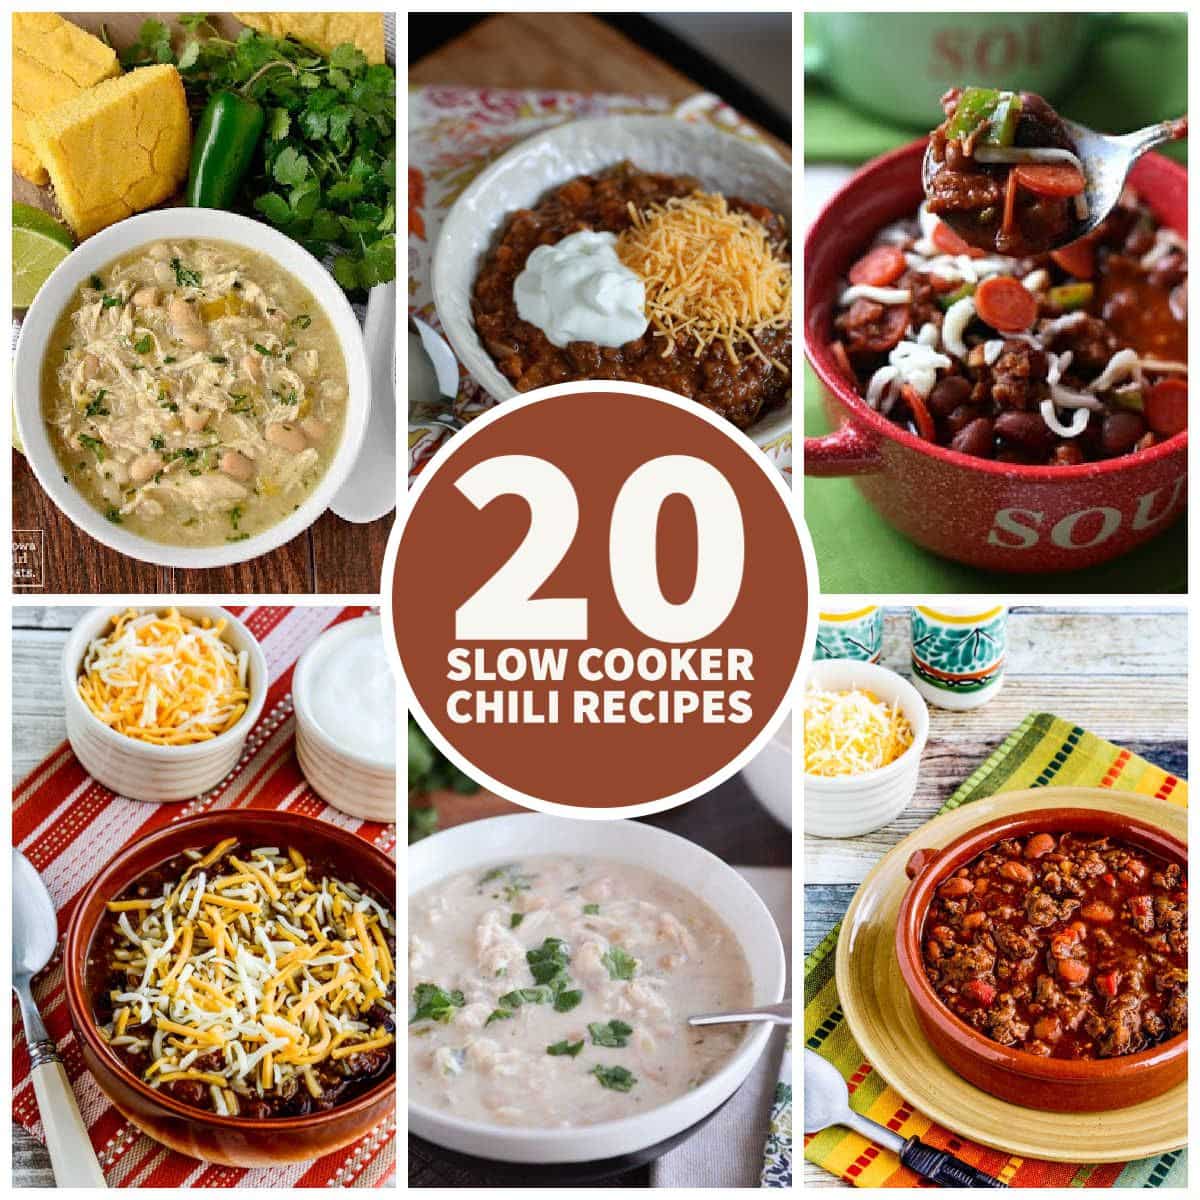 20 Slow Cooker Chili Recipes collage of featured recipes